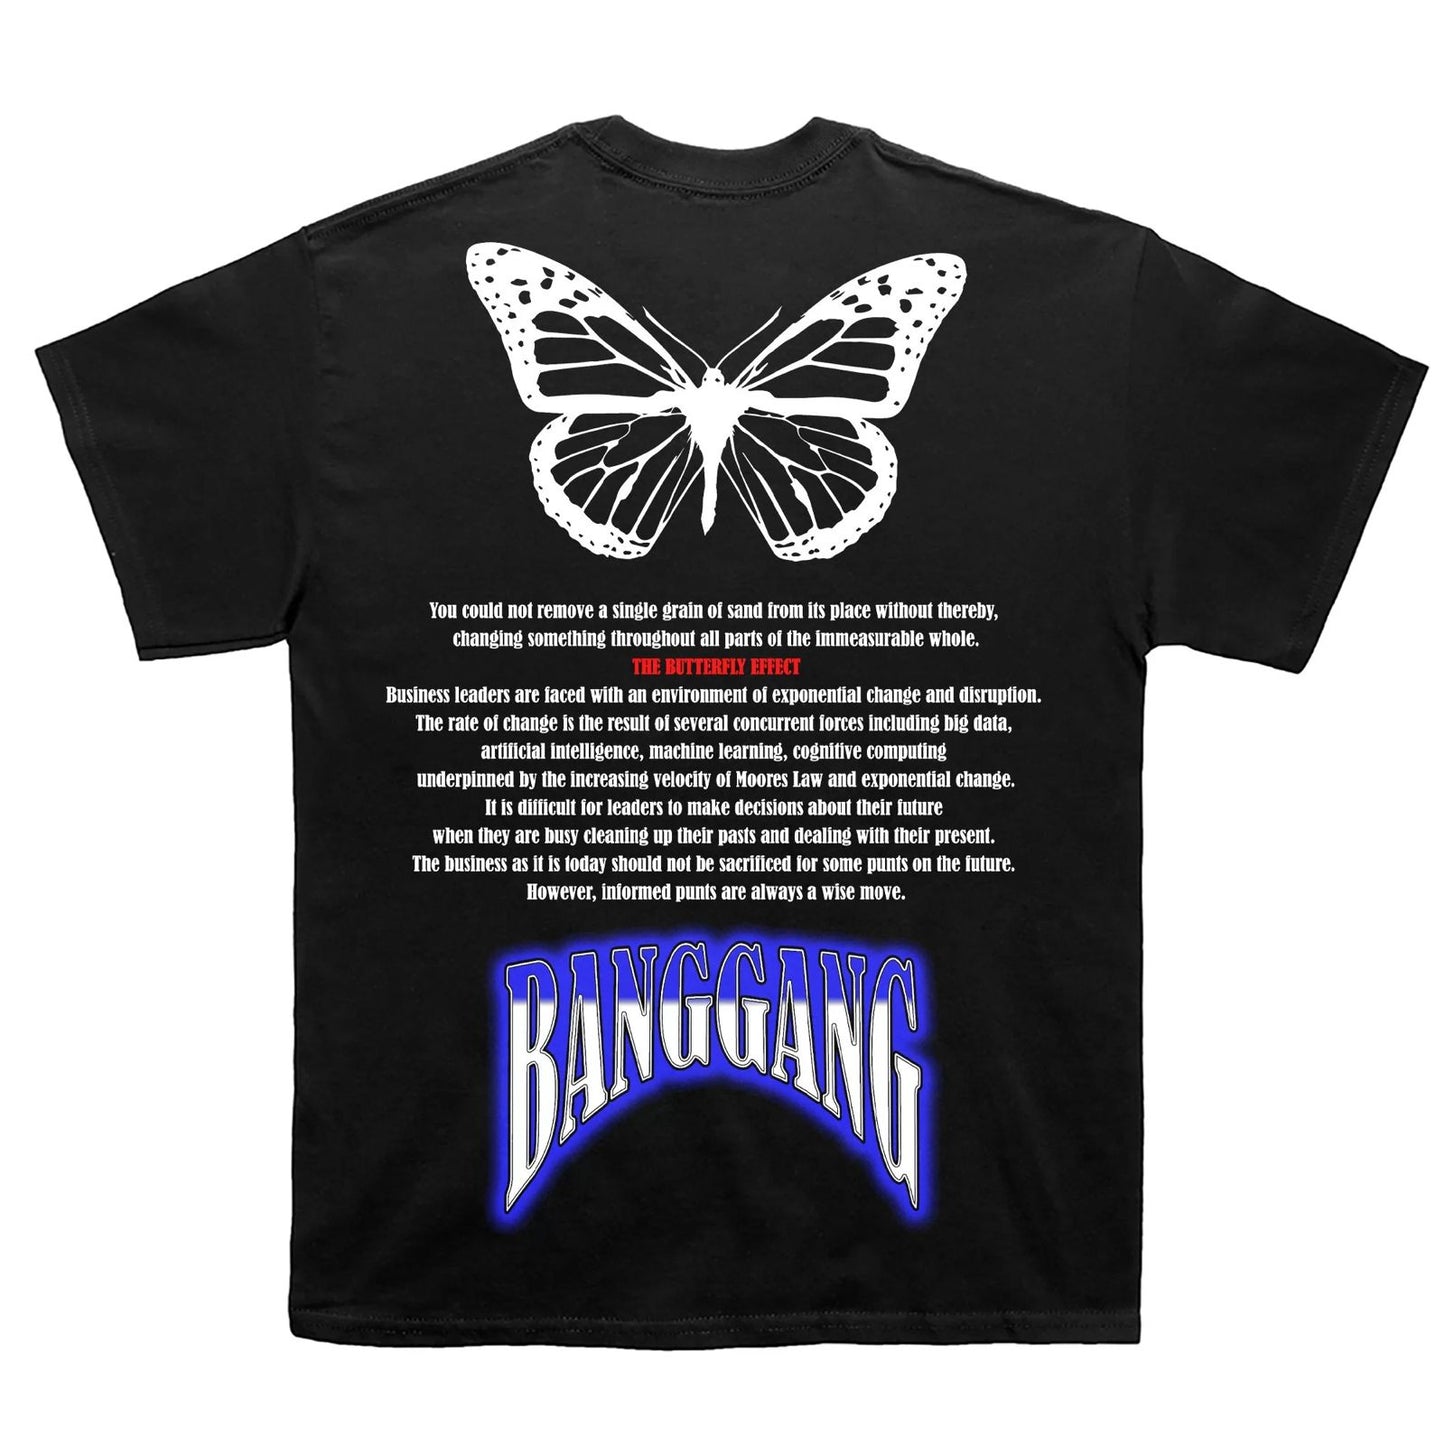 Bvng Gvng Polera Butterfly Effect